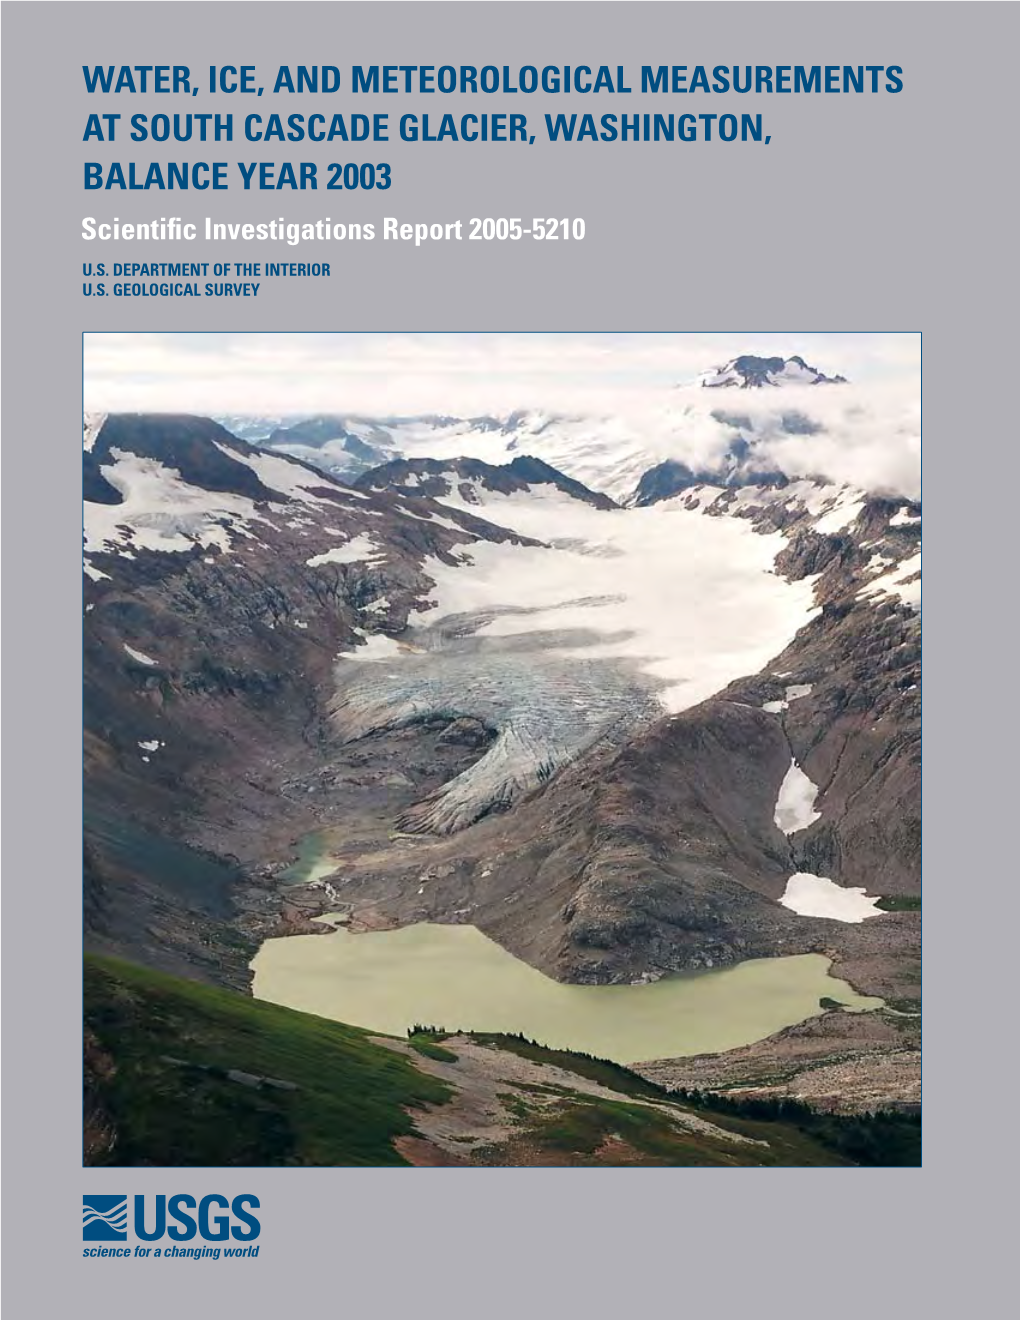 WATER, ICE, and METEOROLOGICAL MEASUREMENTS at SOUTH CASCADE GLACIER, WASHINGTON, BALANCE YEAR 2003 Scientific Investigations Report 2005-5210 U.S